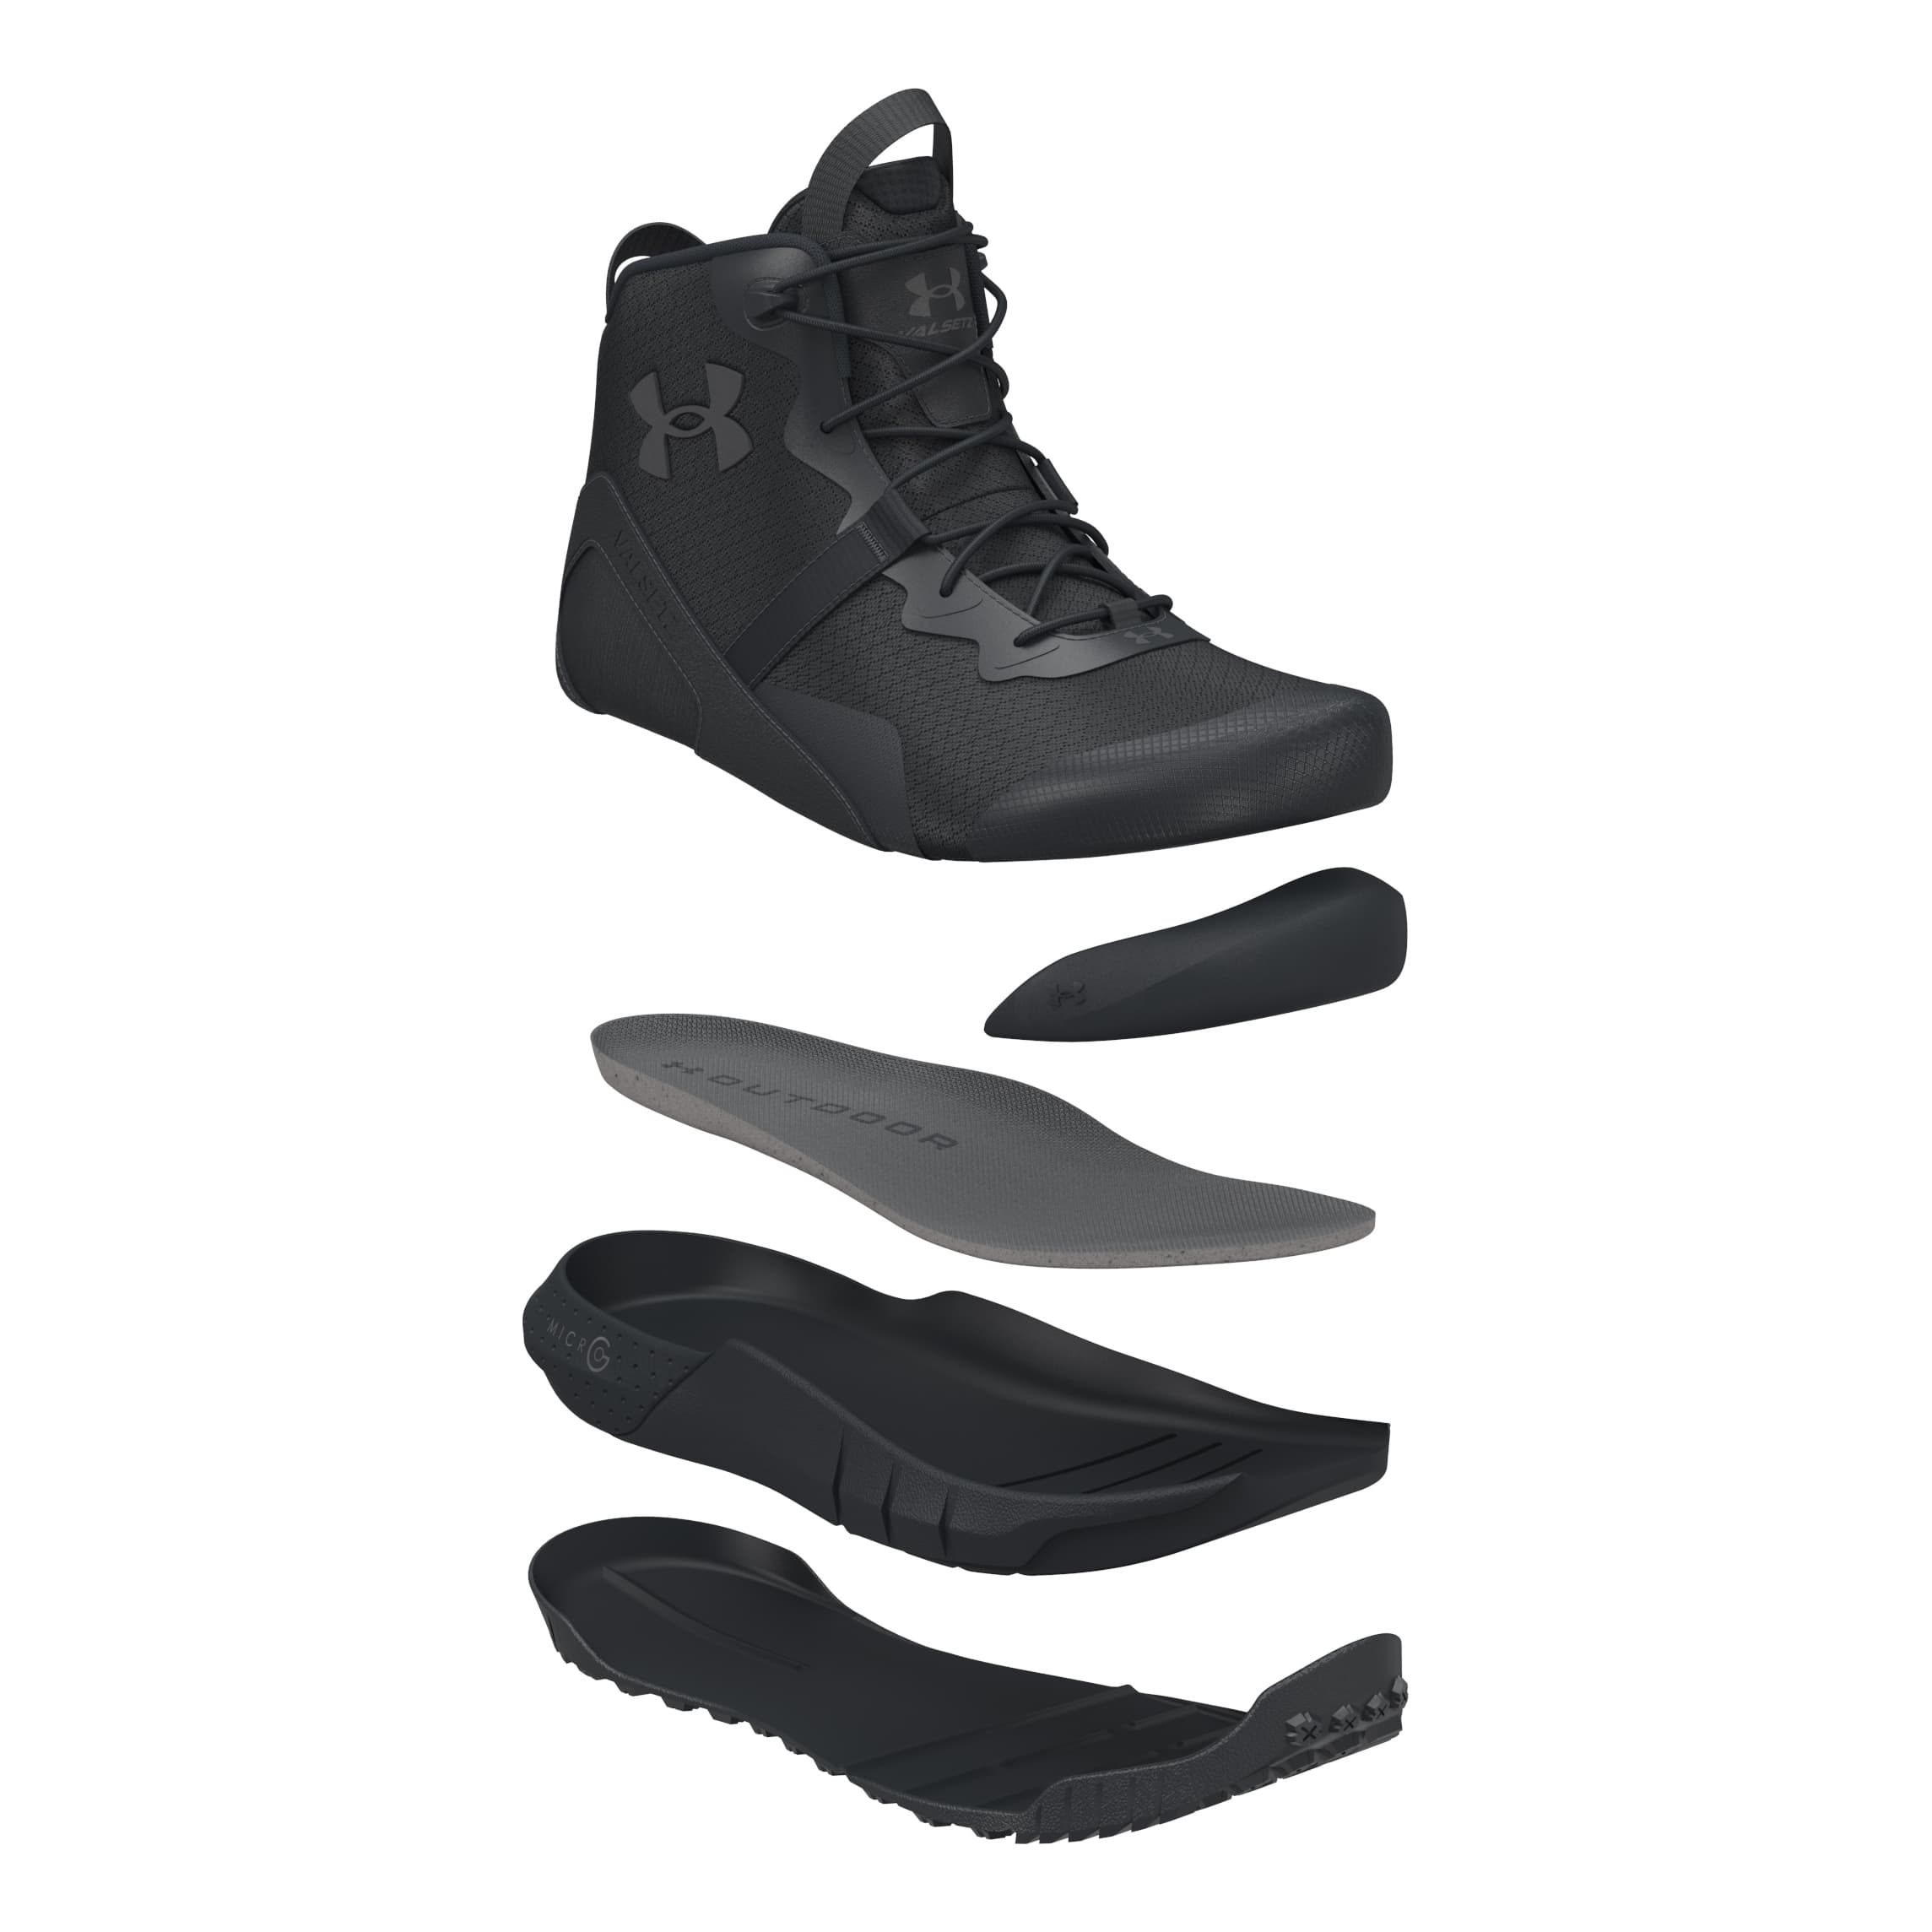 Under Armour® Men’s Micro G Valsetz Zip Mid Tactical Boot - exploded view